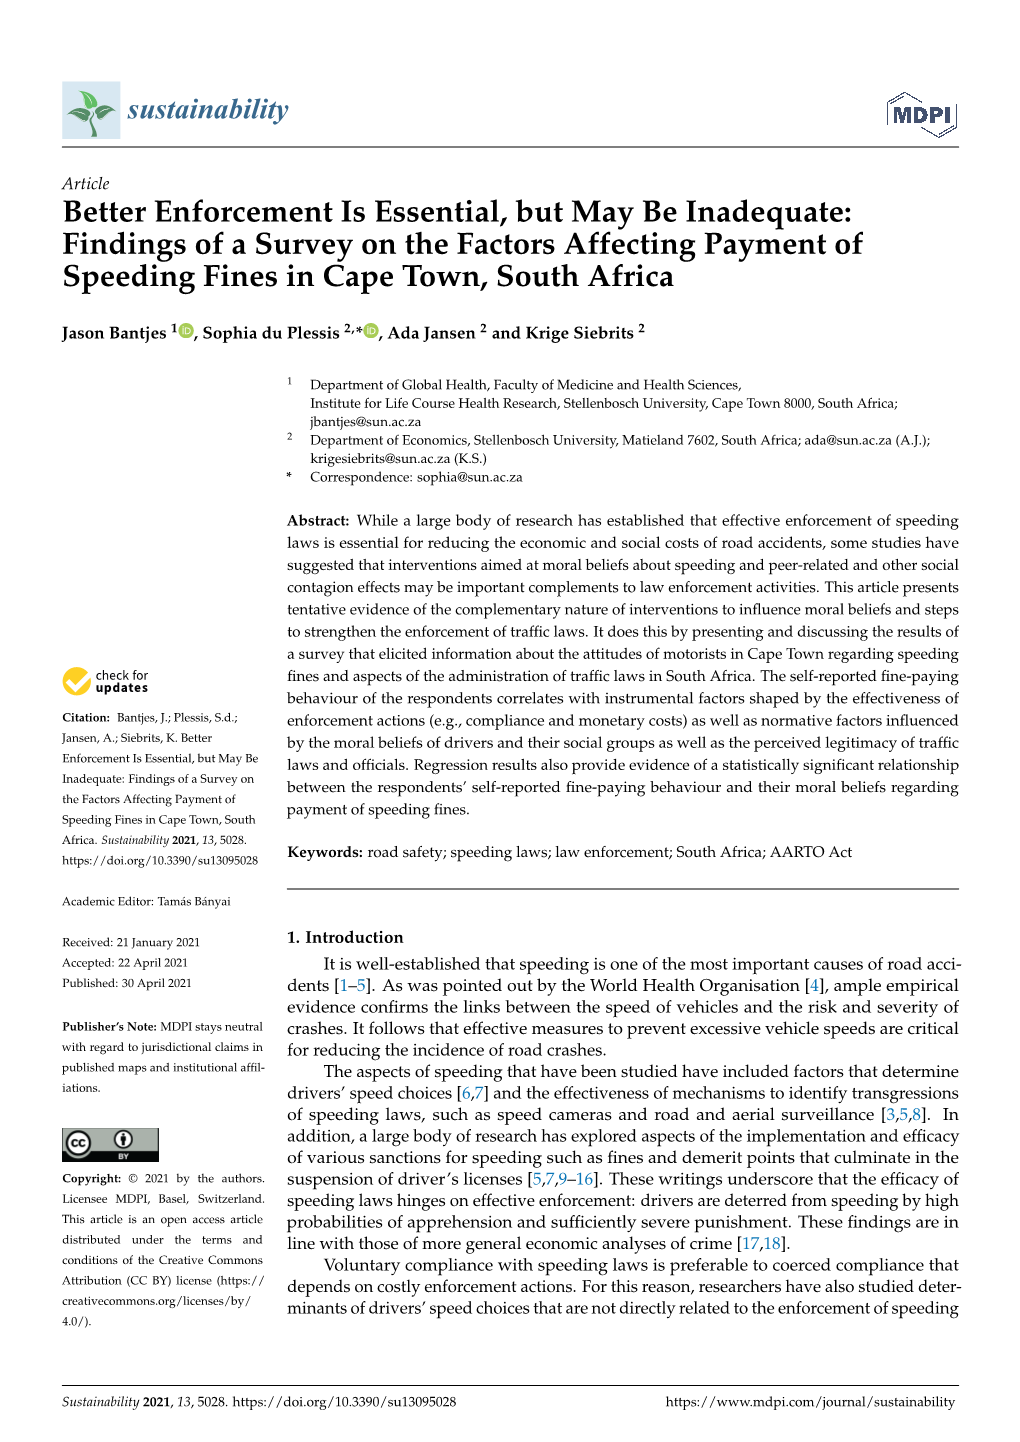 Better Enforcement Is Essential, but May Be Inadequate: Findings of a Survey on the Factors Affecting Payment of Speeding Fines in Cape Town, South Africa